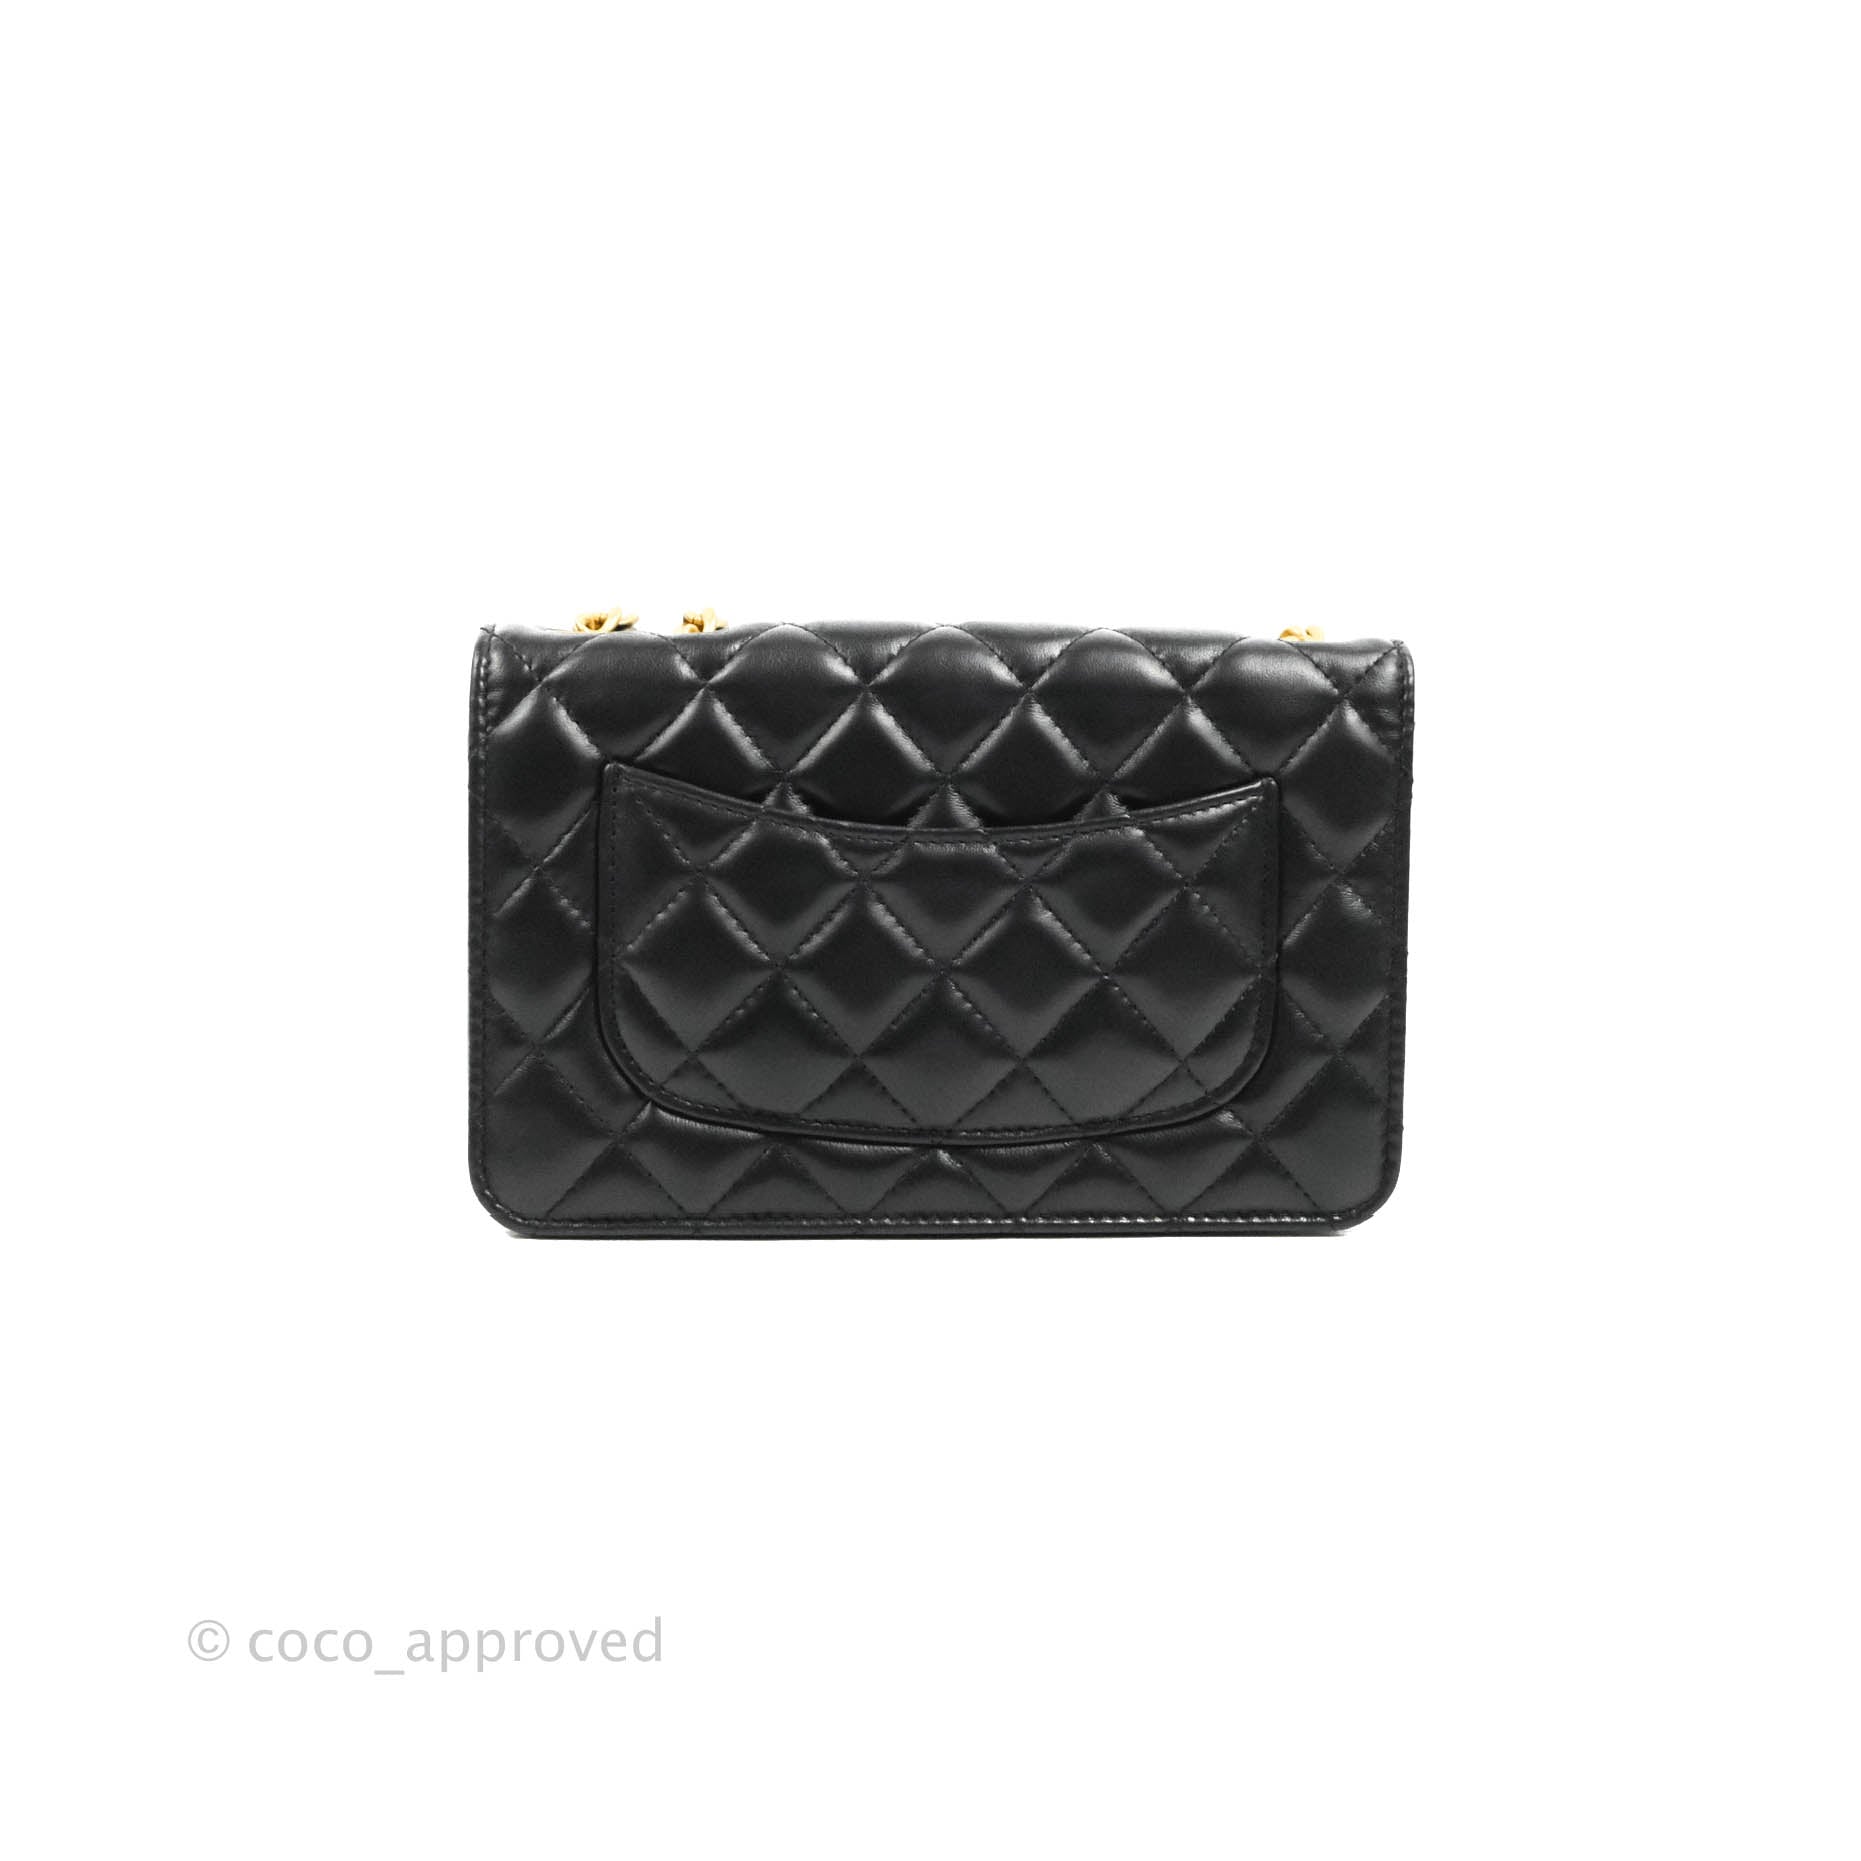 black leather chanel wallet authentic